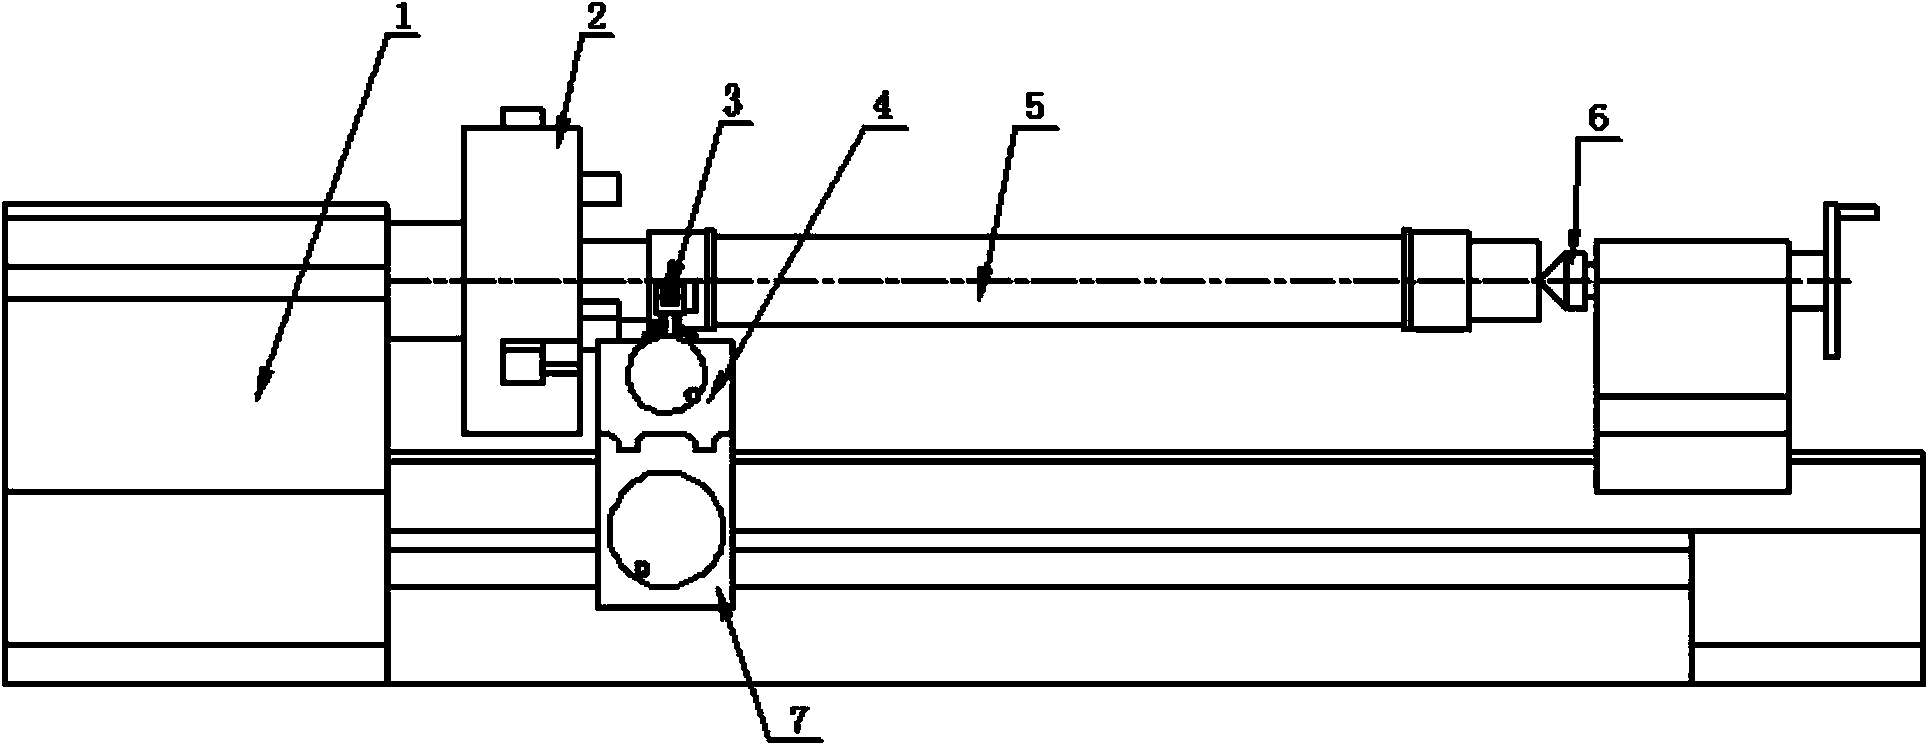 Non-contact type measuring system for train axle wheel seat and measuring method thereof